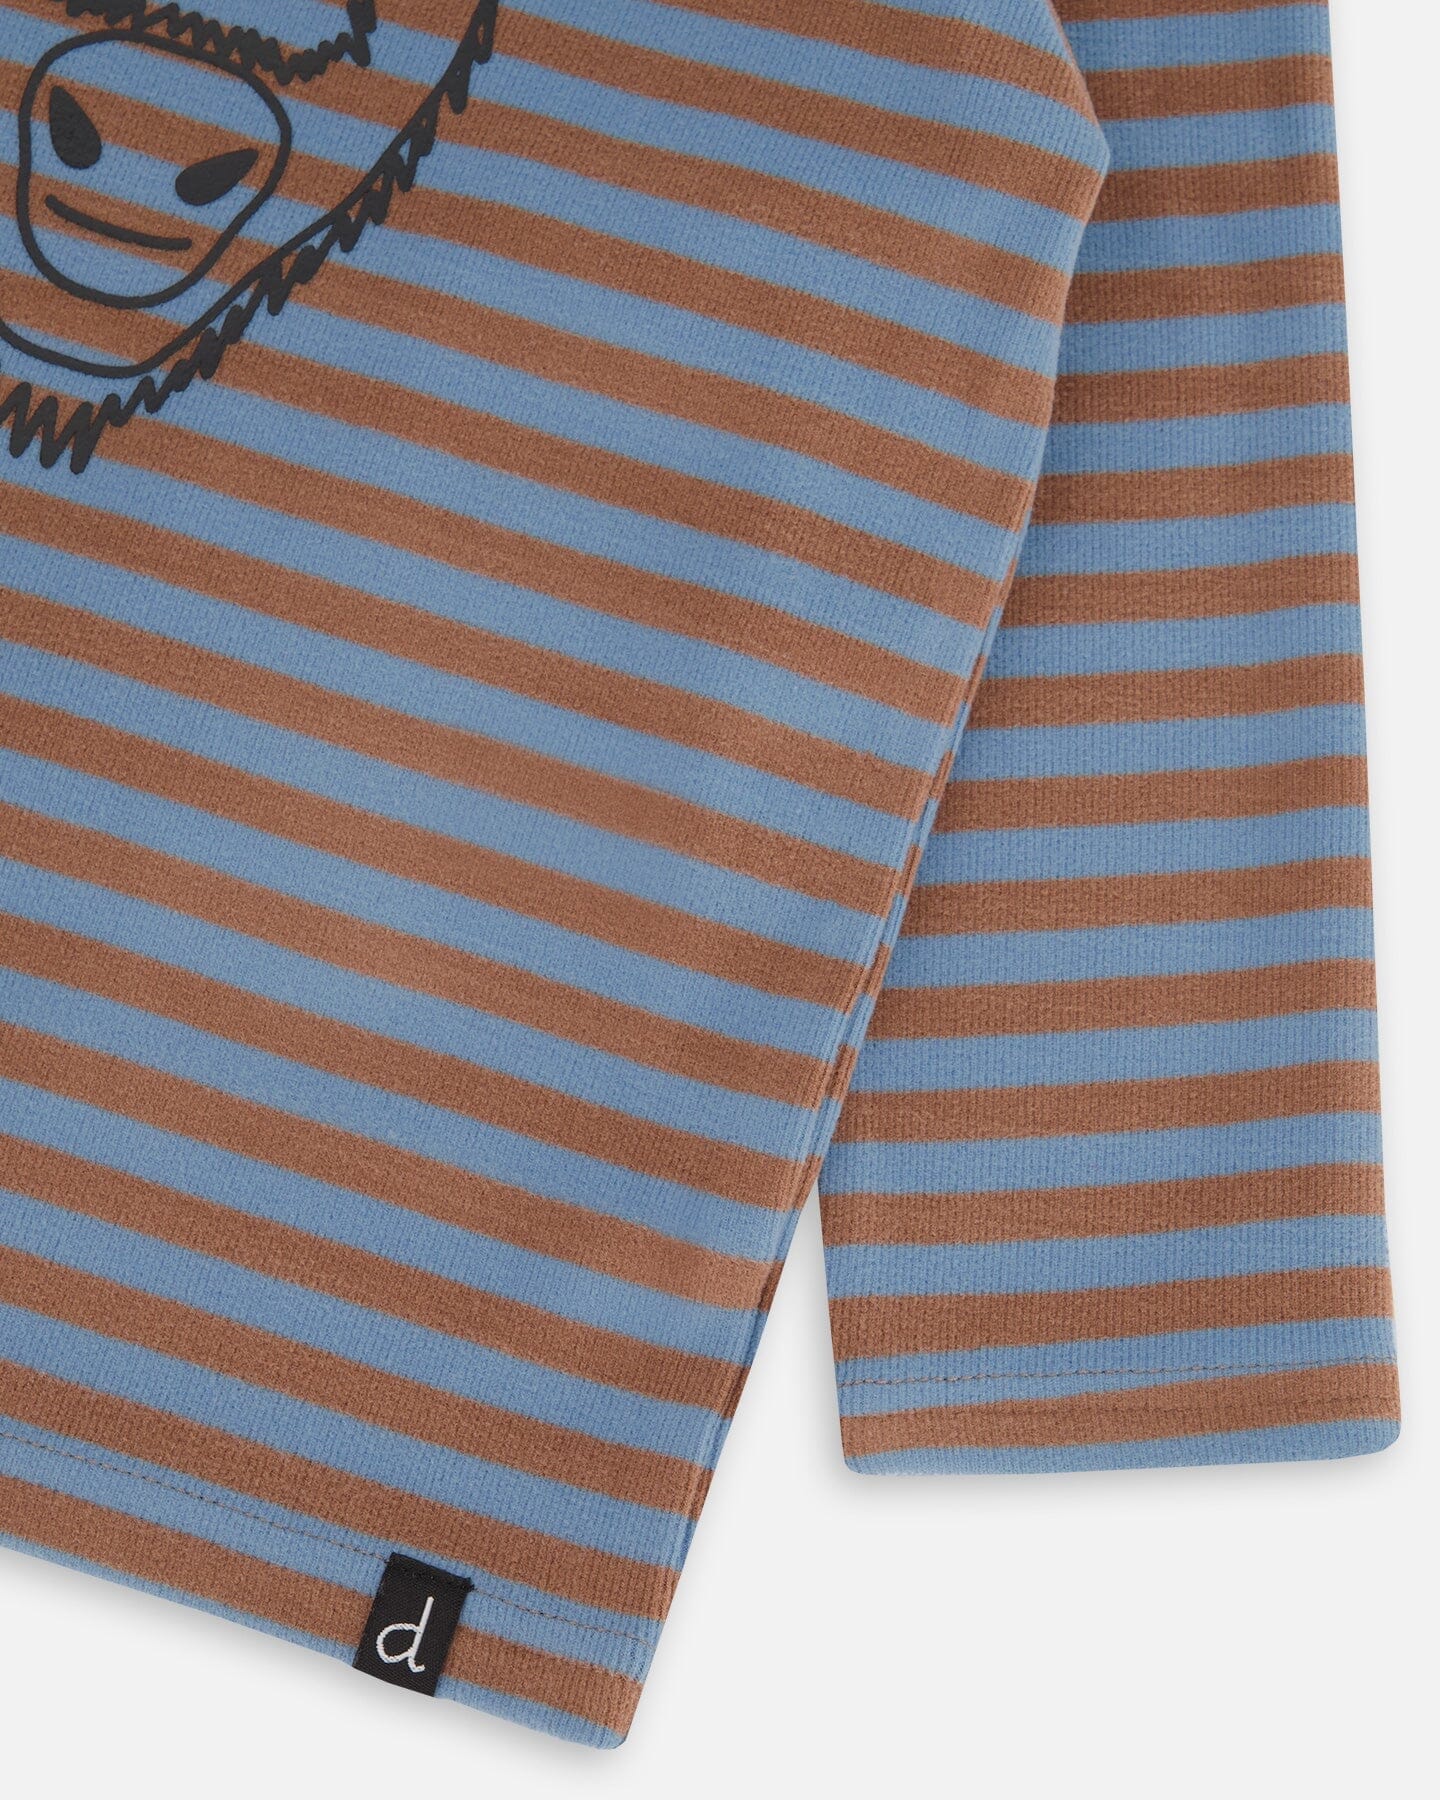 Super Soft Heavy Jersey Hooded Striped Top Blue And Brown Stripe